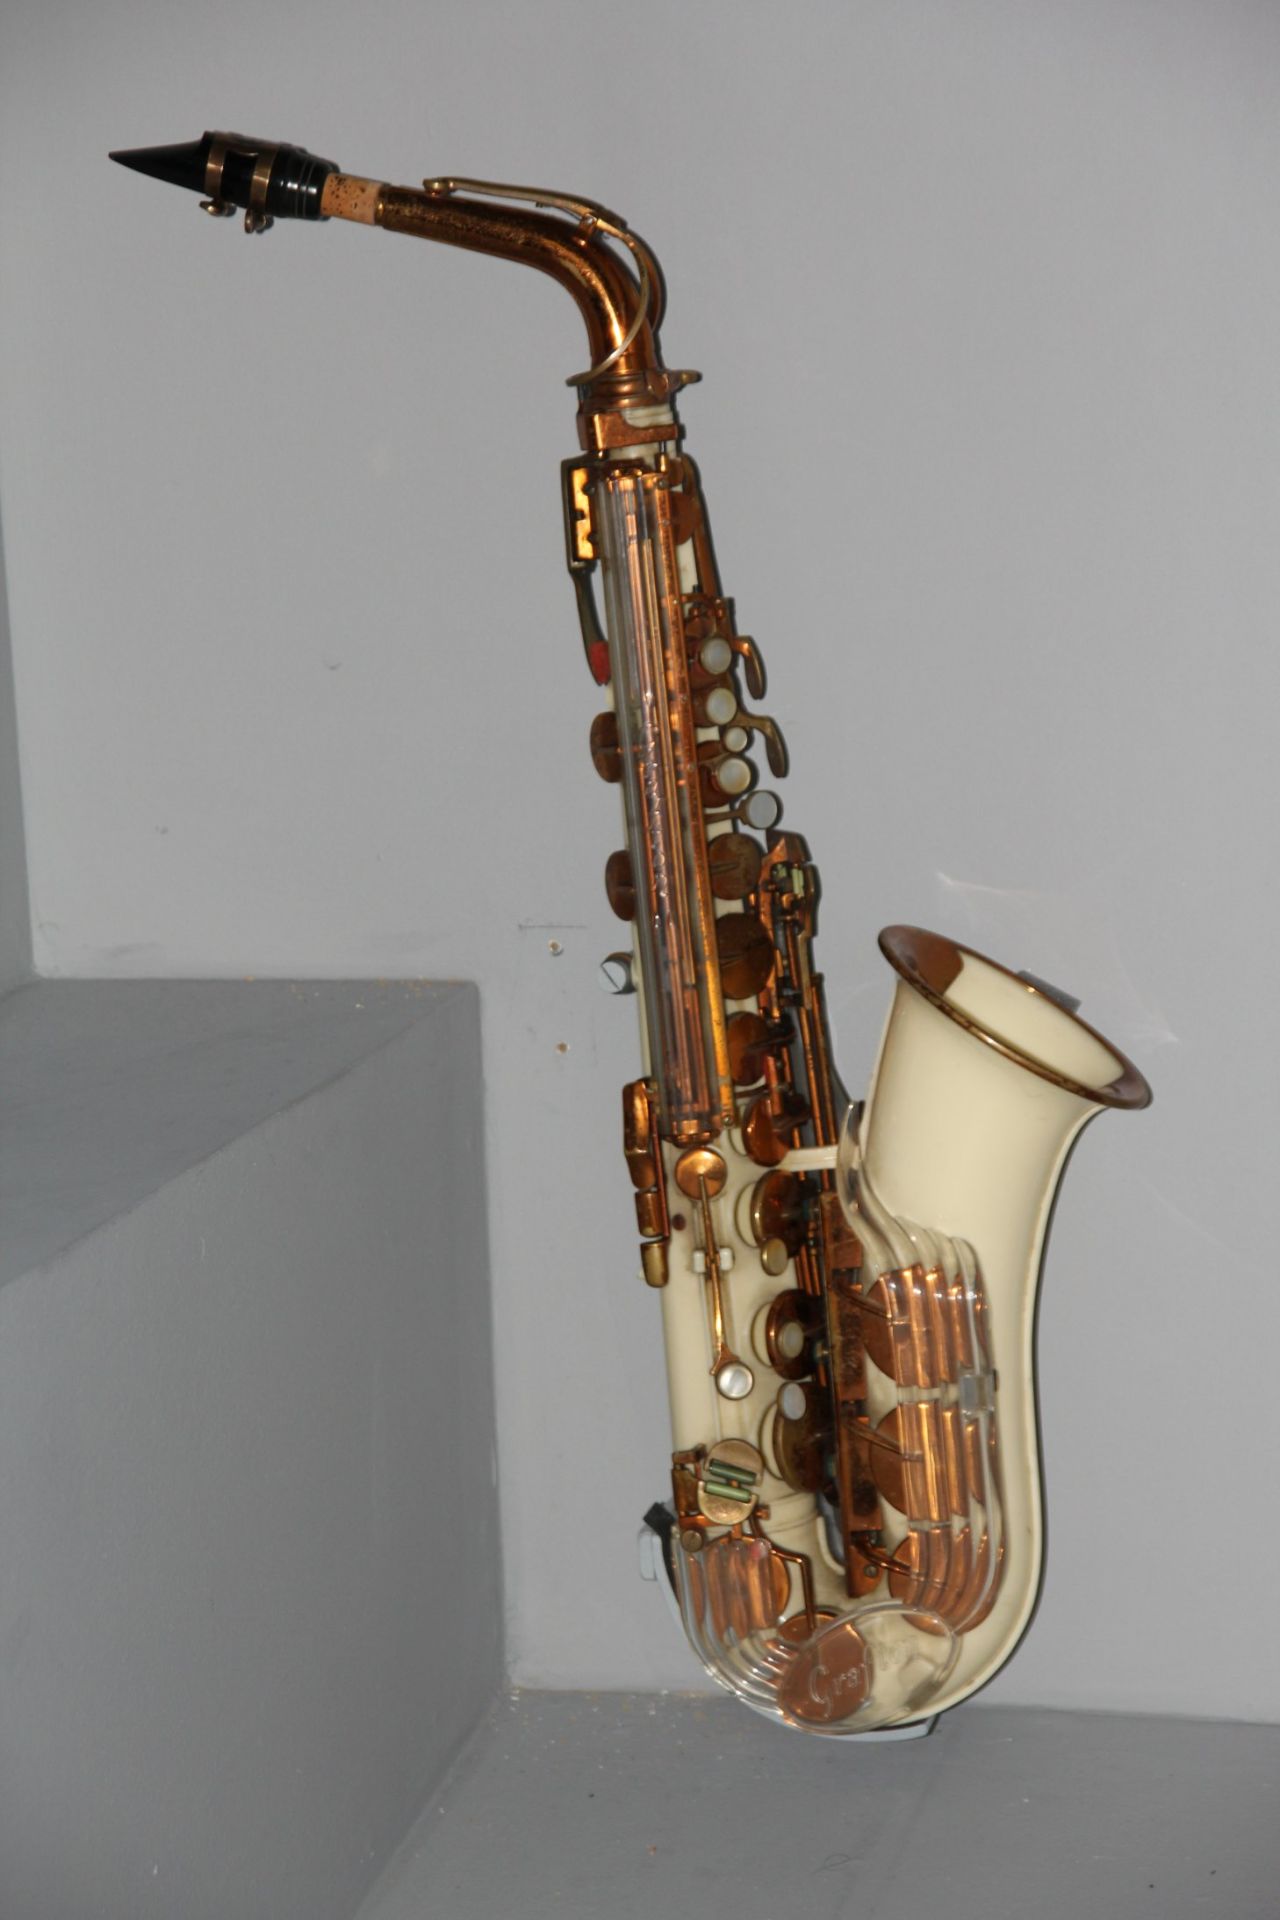 In his early teens Bowie became keen on the jazz of John Coltrane. For Christmas 1961 his father bought him this white acrylic Grafton alto sax. It used new plastics technology, and cost £55, about half the cost of a brass instrument. 